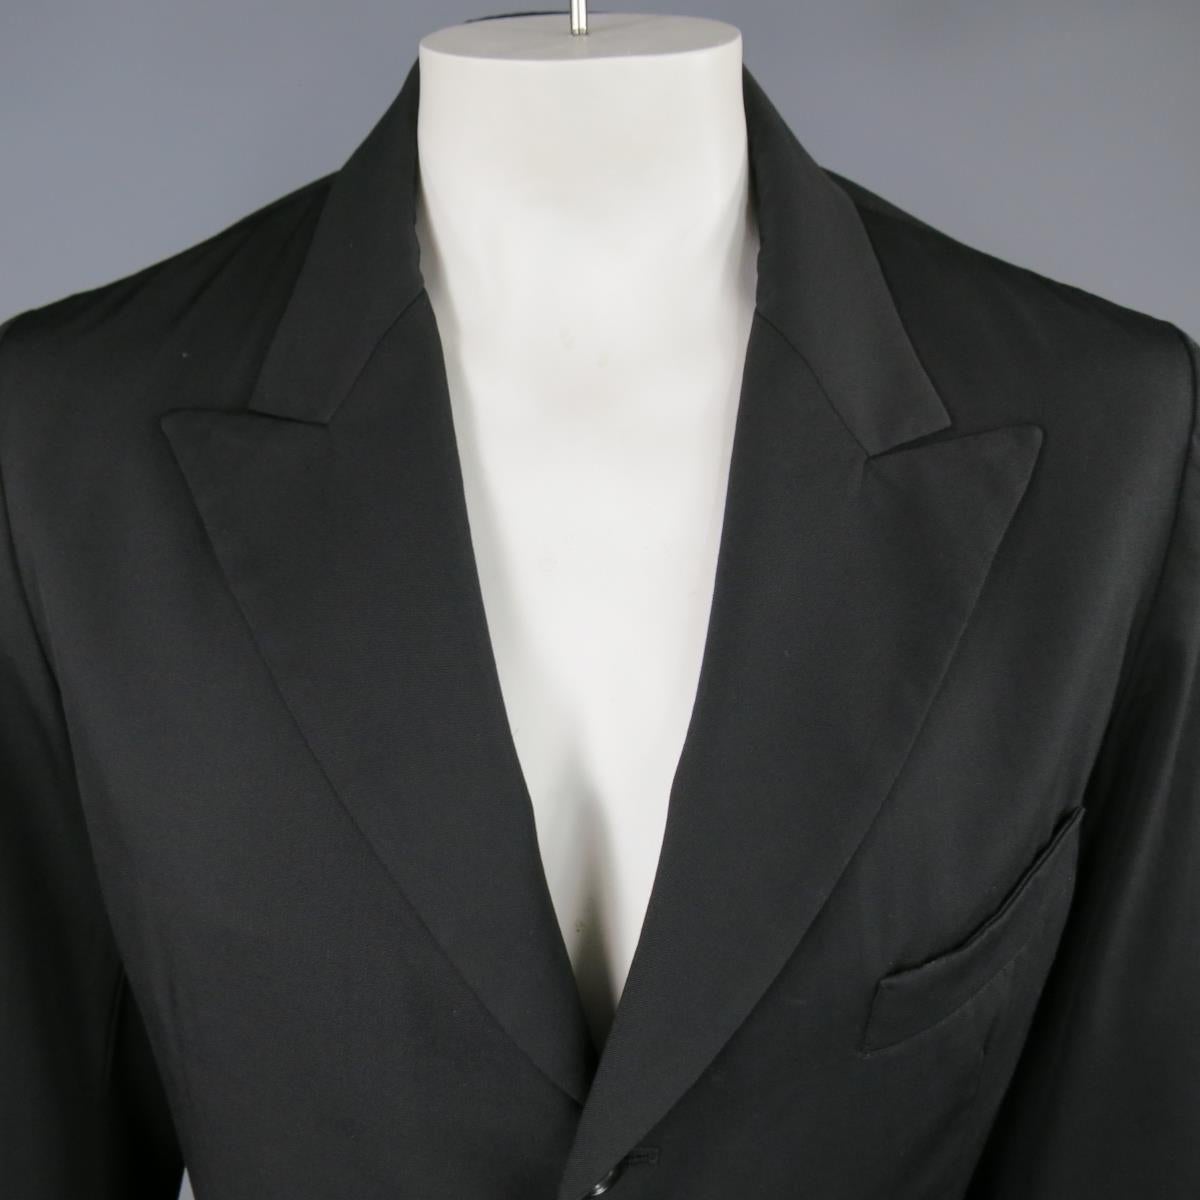 Y'S by YOHJI YAMAMOTO Sport Coat consists of 100% wool material in a black color tone. Designed with a peak-lapel collar, 3-button front, bottom inseam pockets with top pocket square. Tone-on-tone stitching throughout coat with 2-button cuffs and no